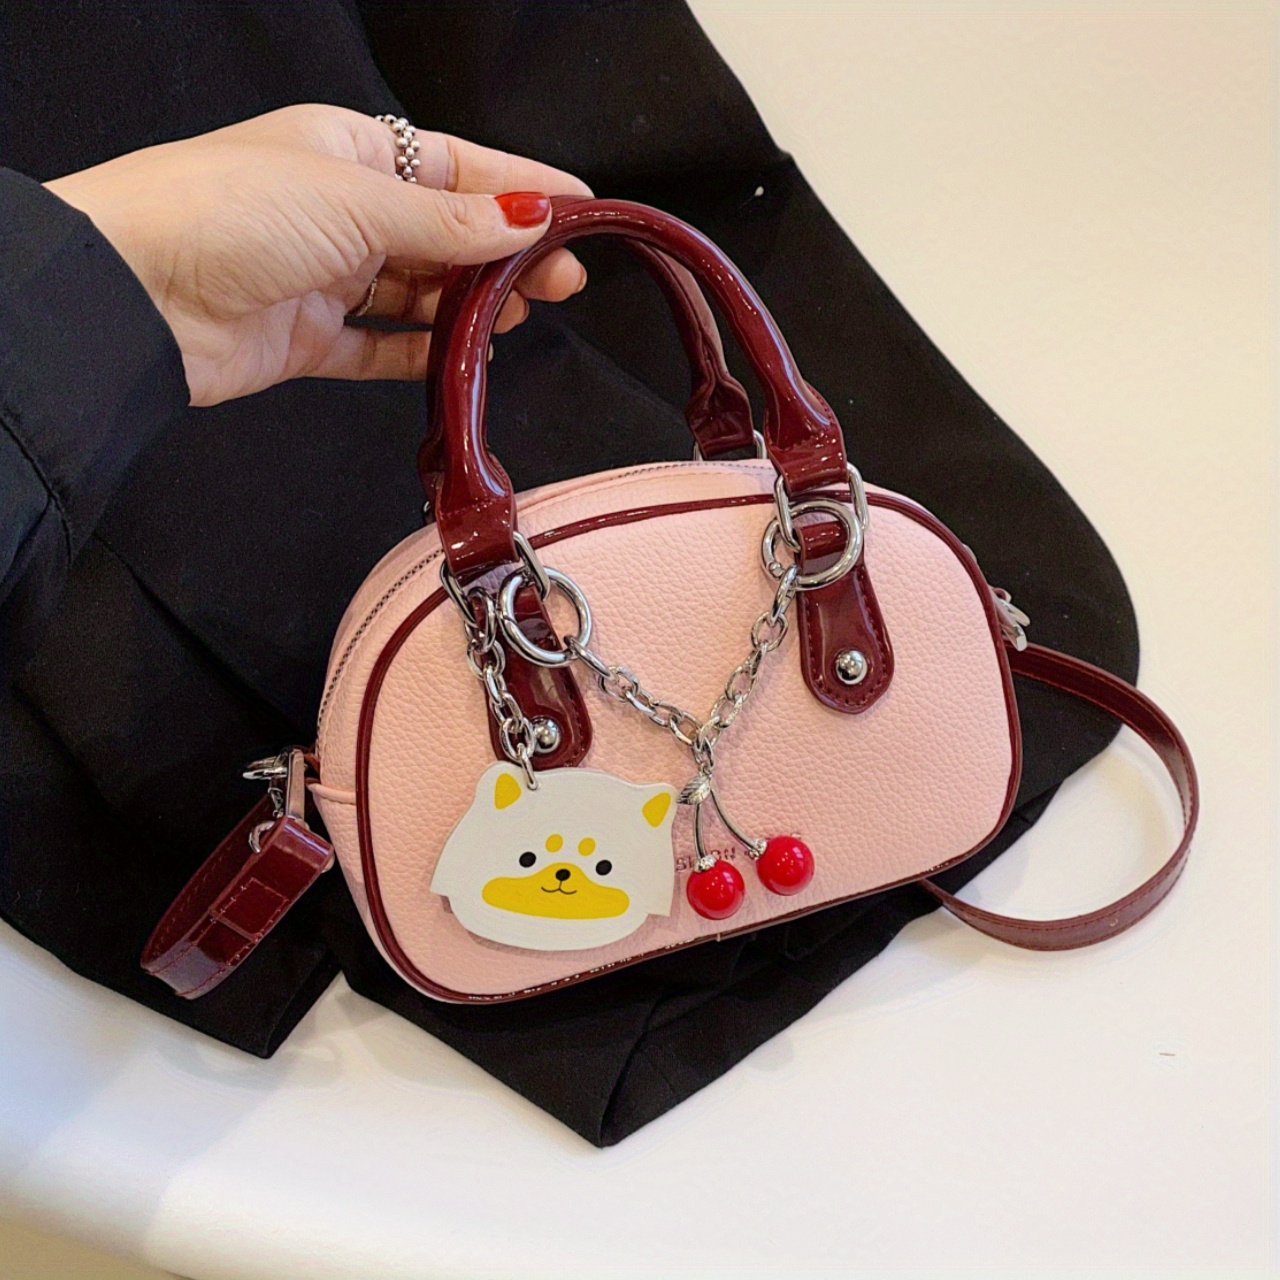 Handbags and Purse for Women Fashion Mushroom Pattern Luxury PU Leather  Female Shoulder Bags Woman Cross Body Bags Casual Totes